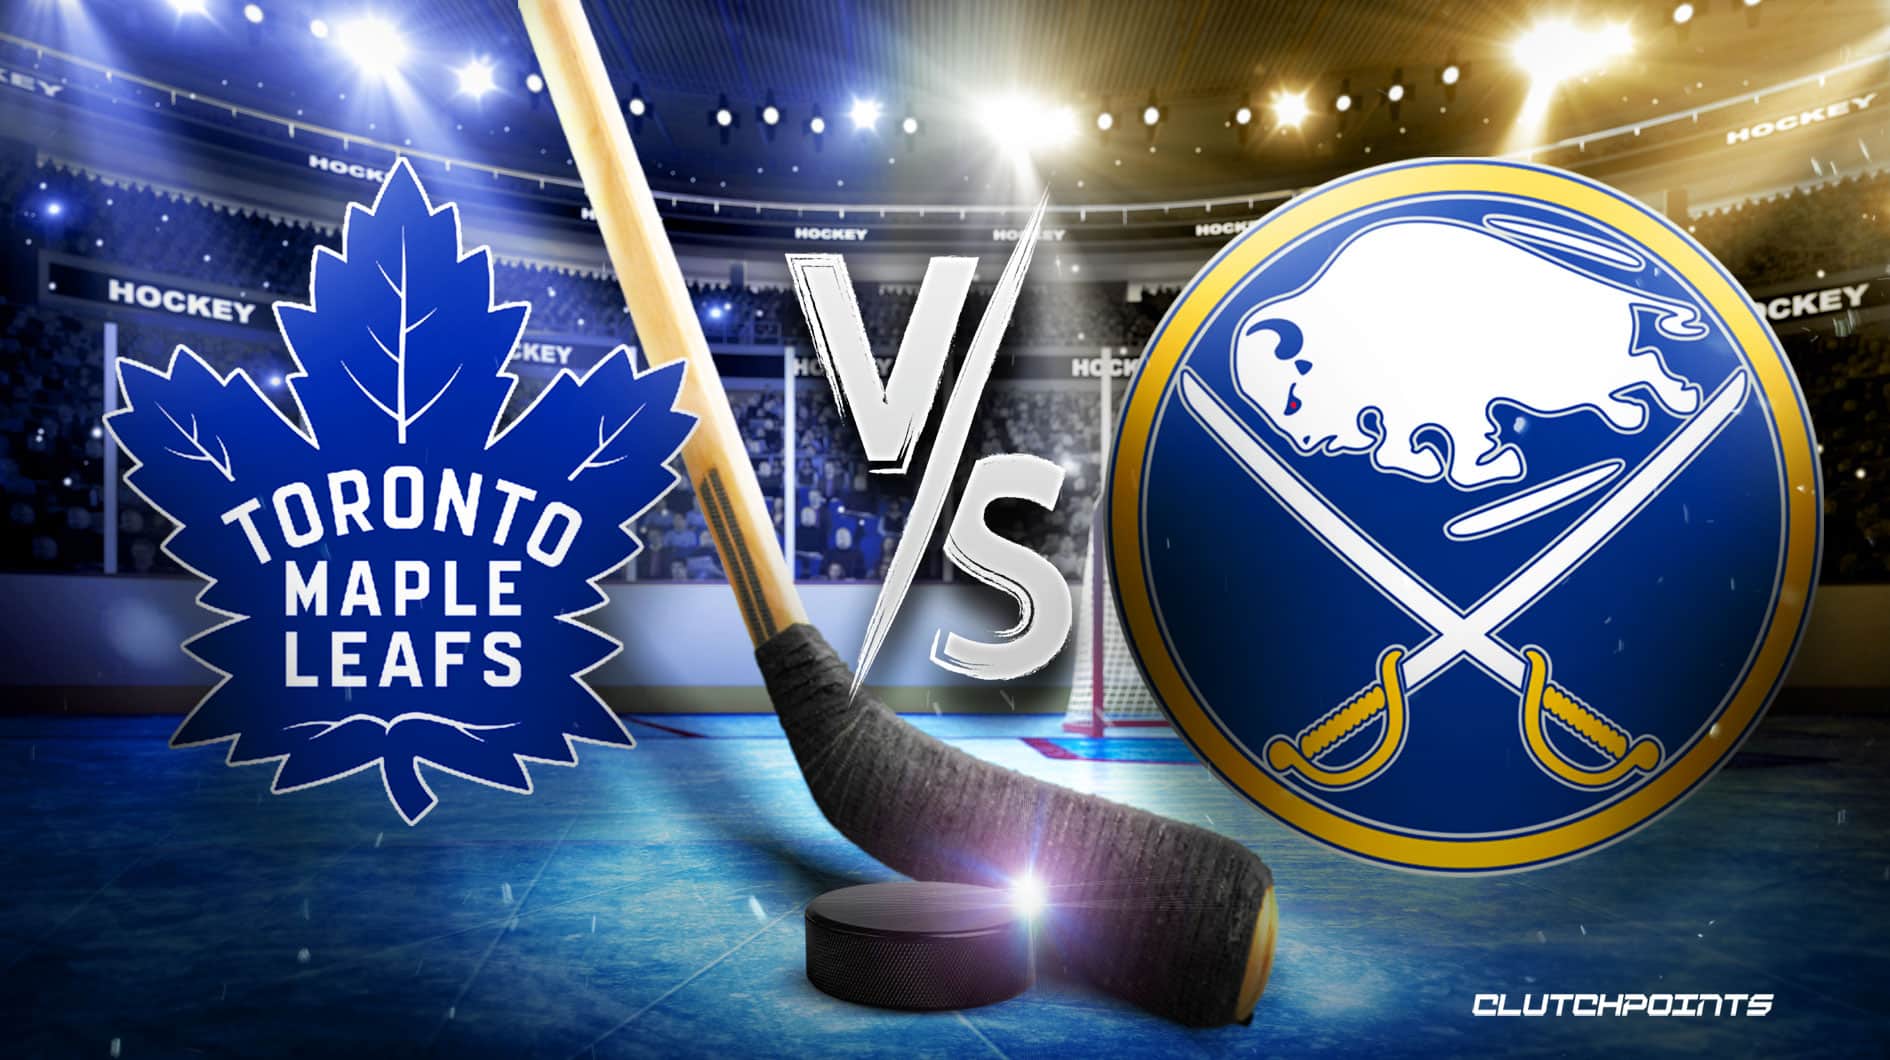 Toronto Maple Leafs vs. Buffalo Sabres Game Preview and Prediction 2/21/2023